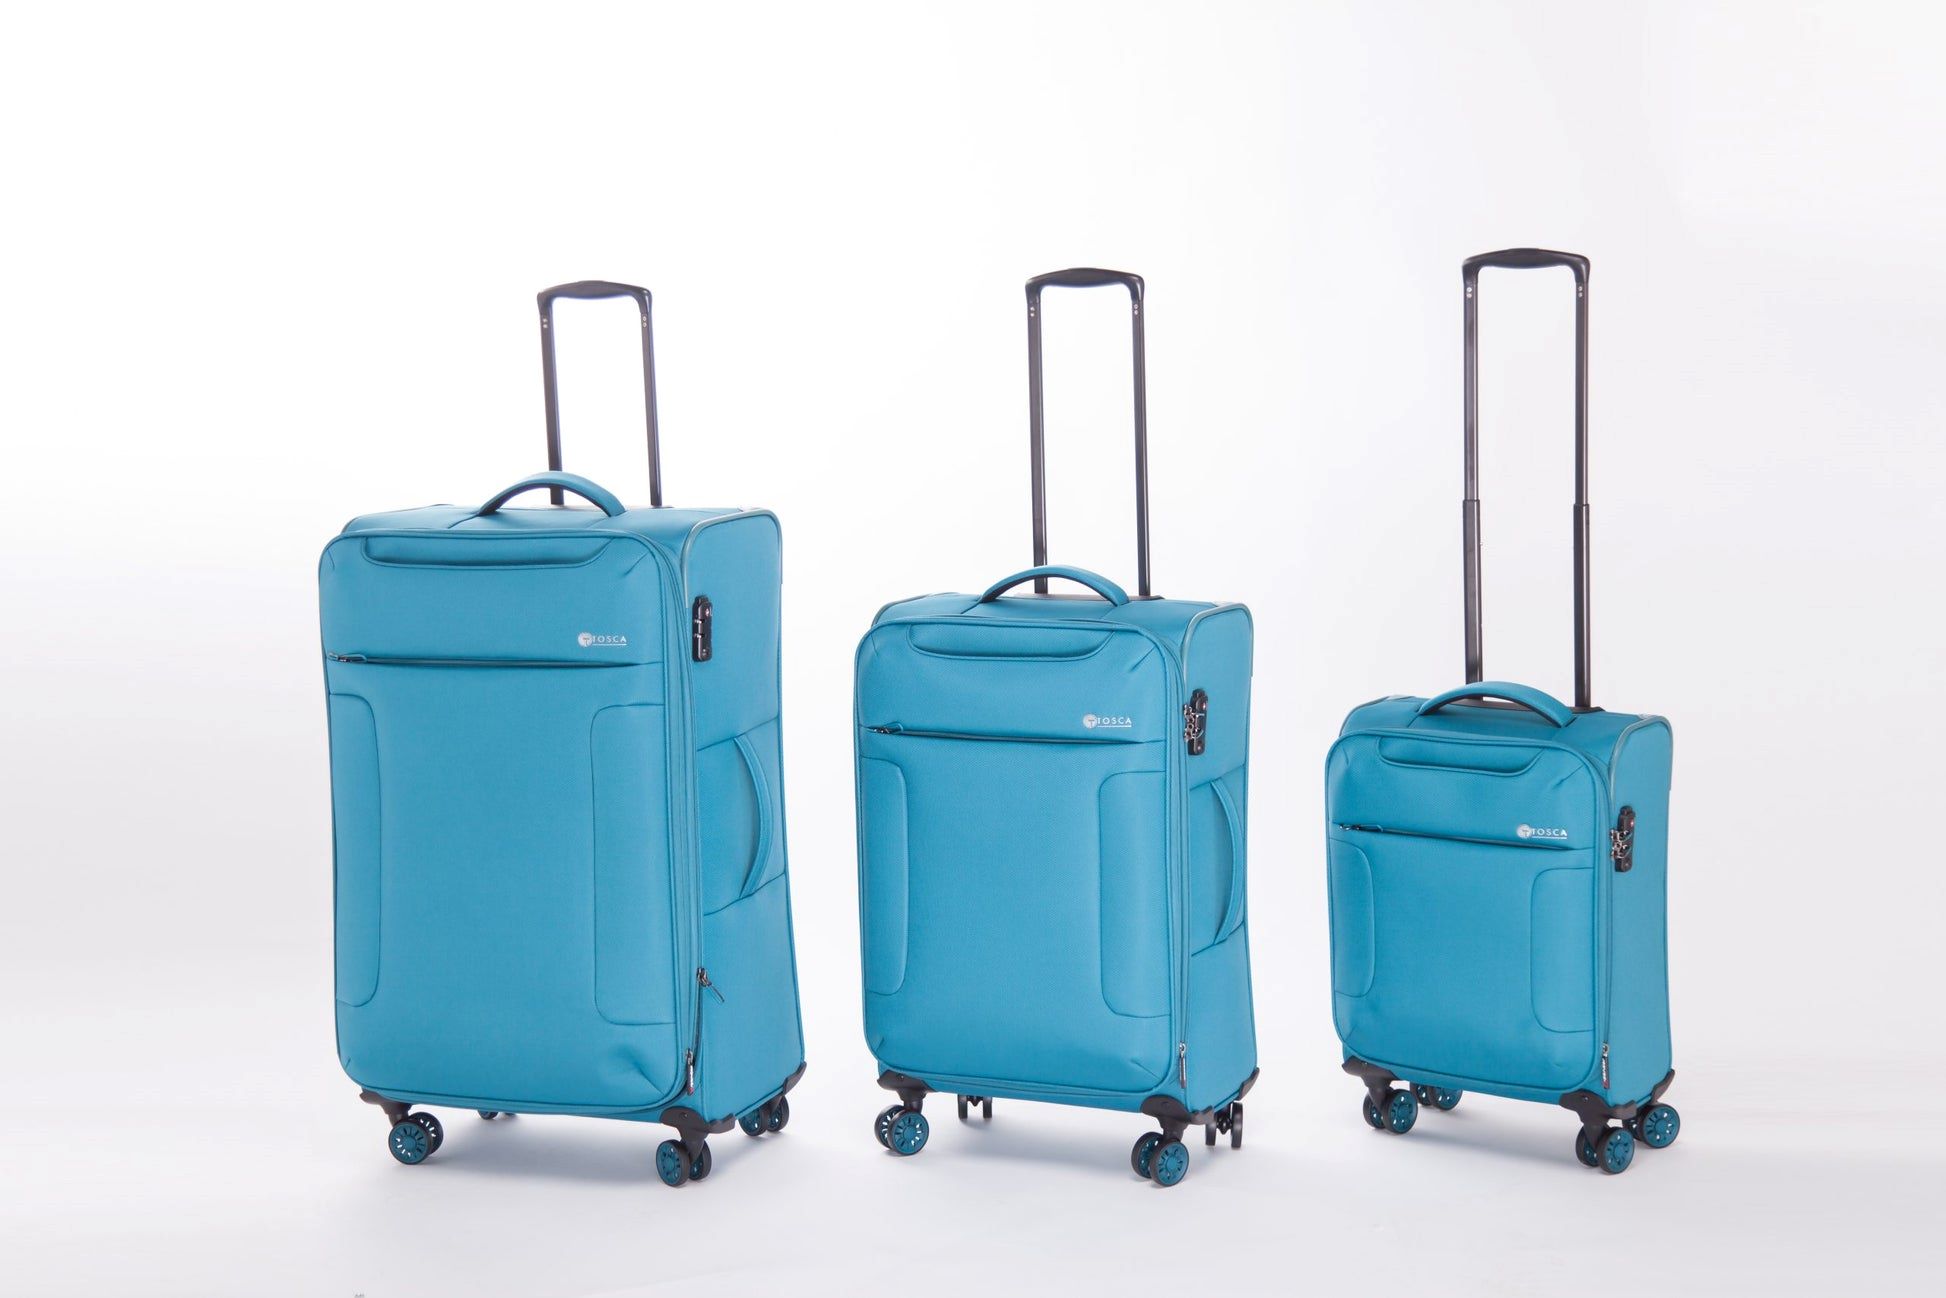 Upgrade Your Travel Game With This Spacious 3-Piece Luggage Set – Now 38% Off!